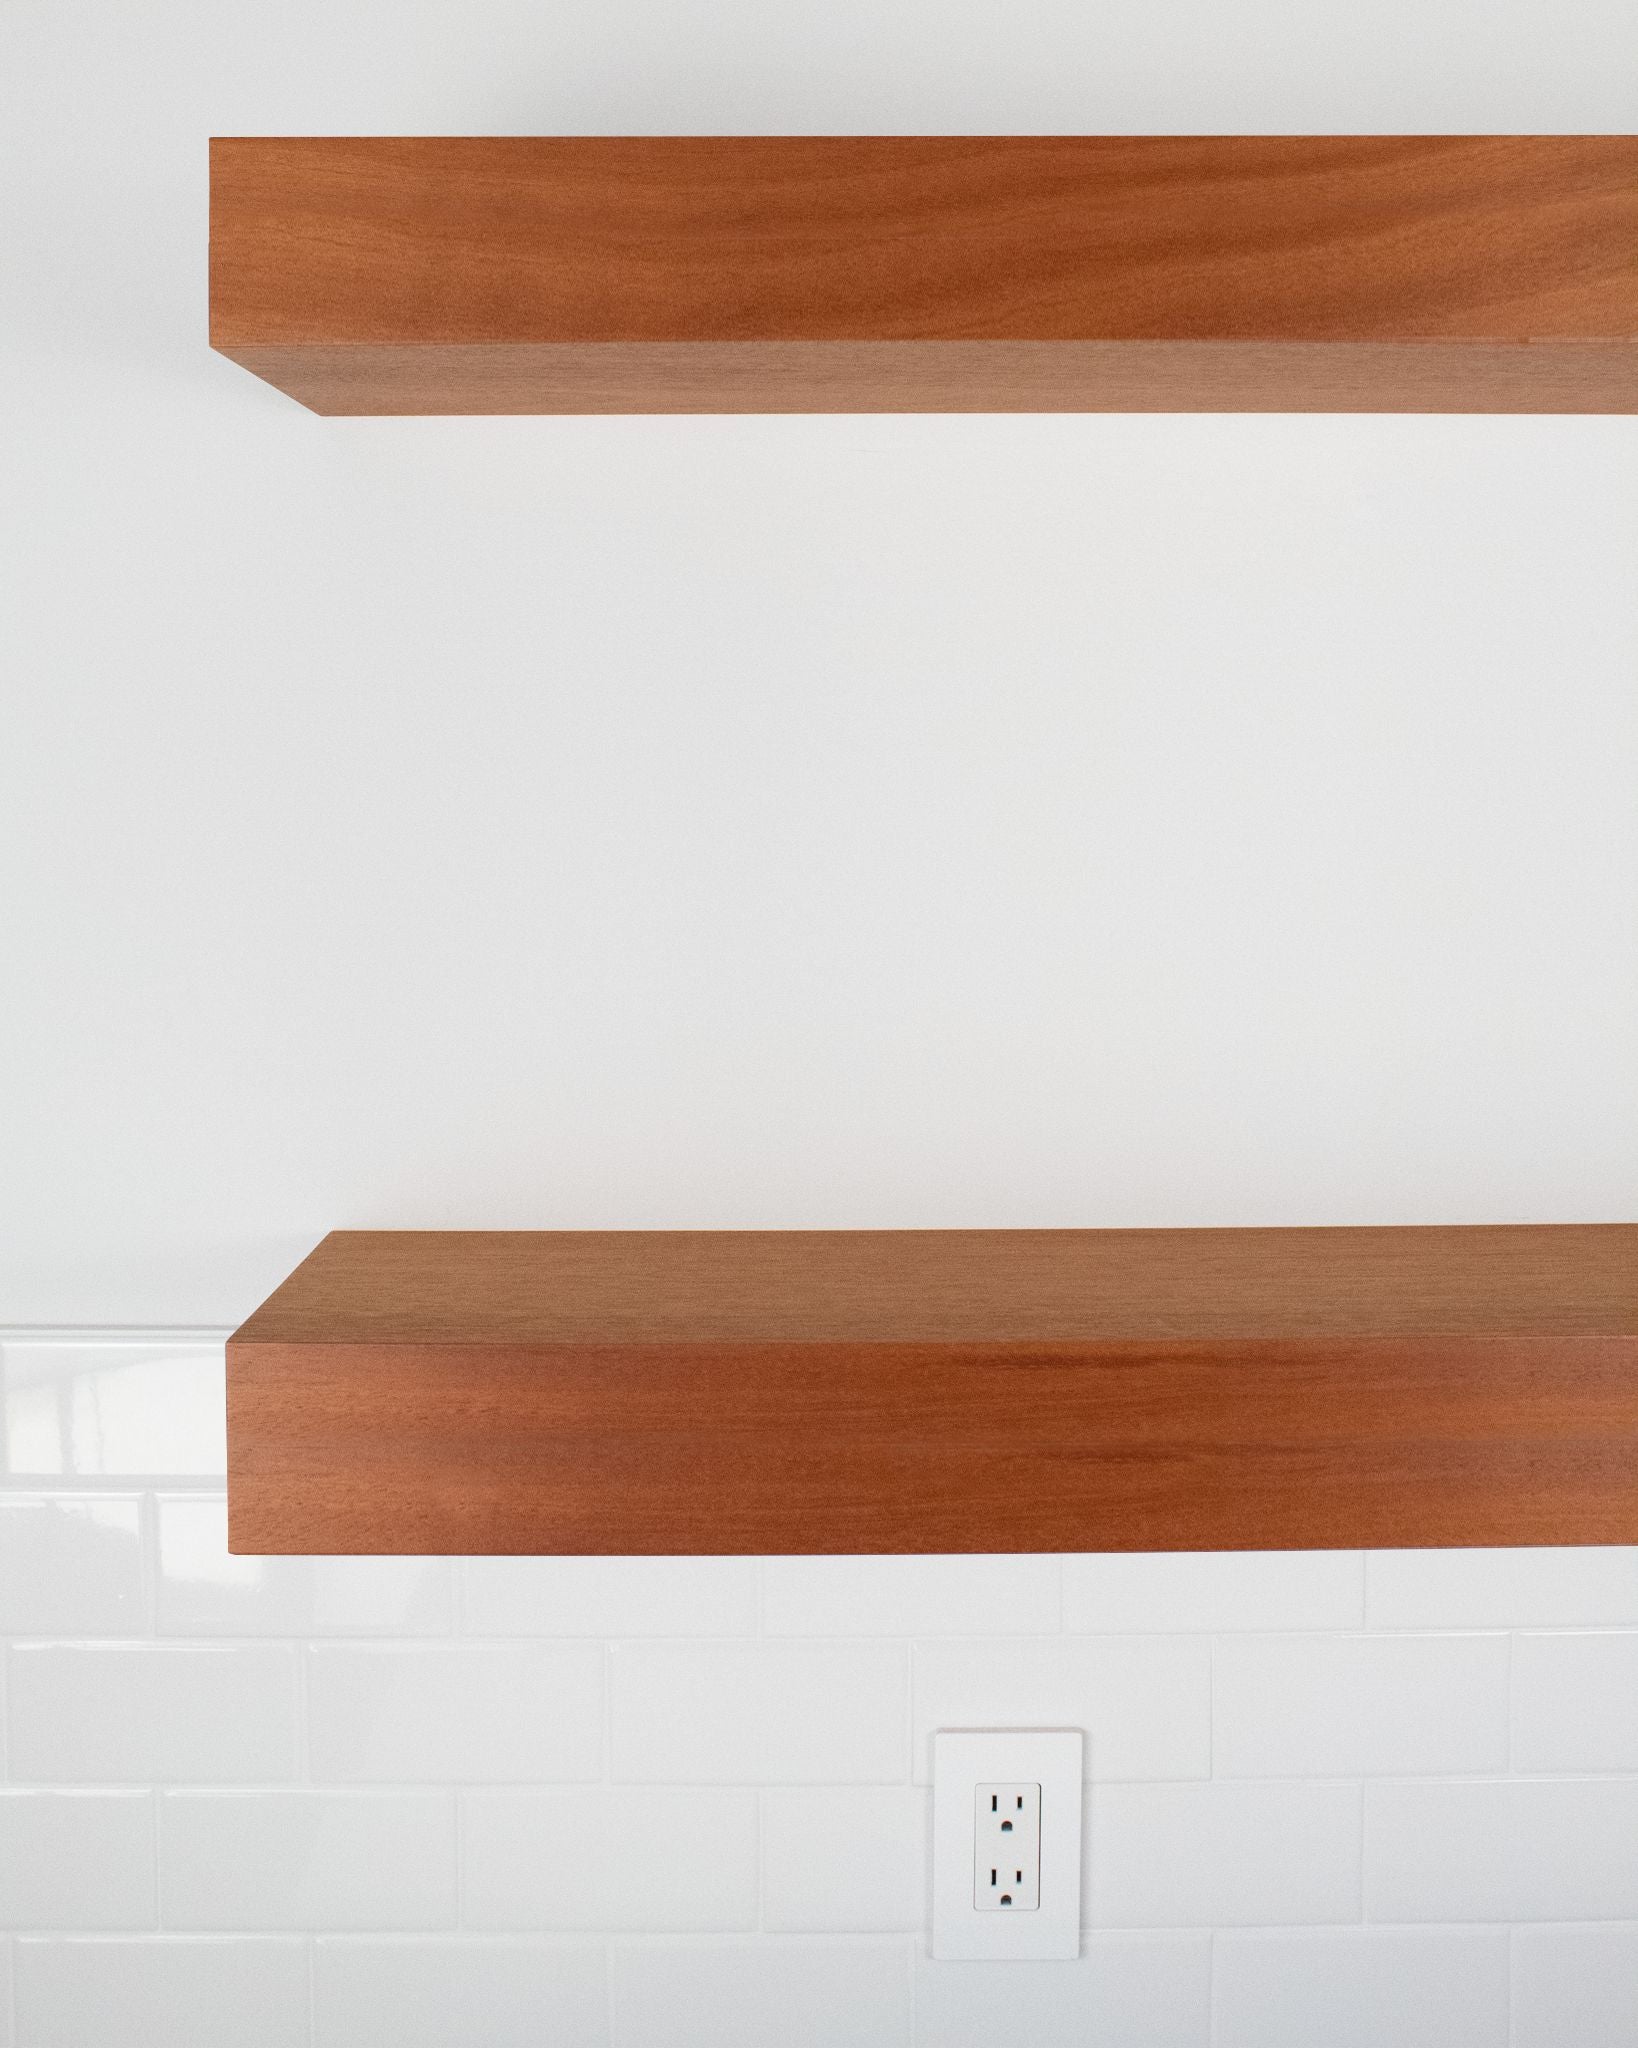 African Mahogany Floating Shelves 2-4" thick